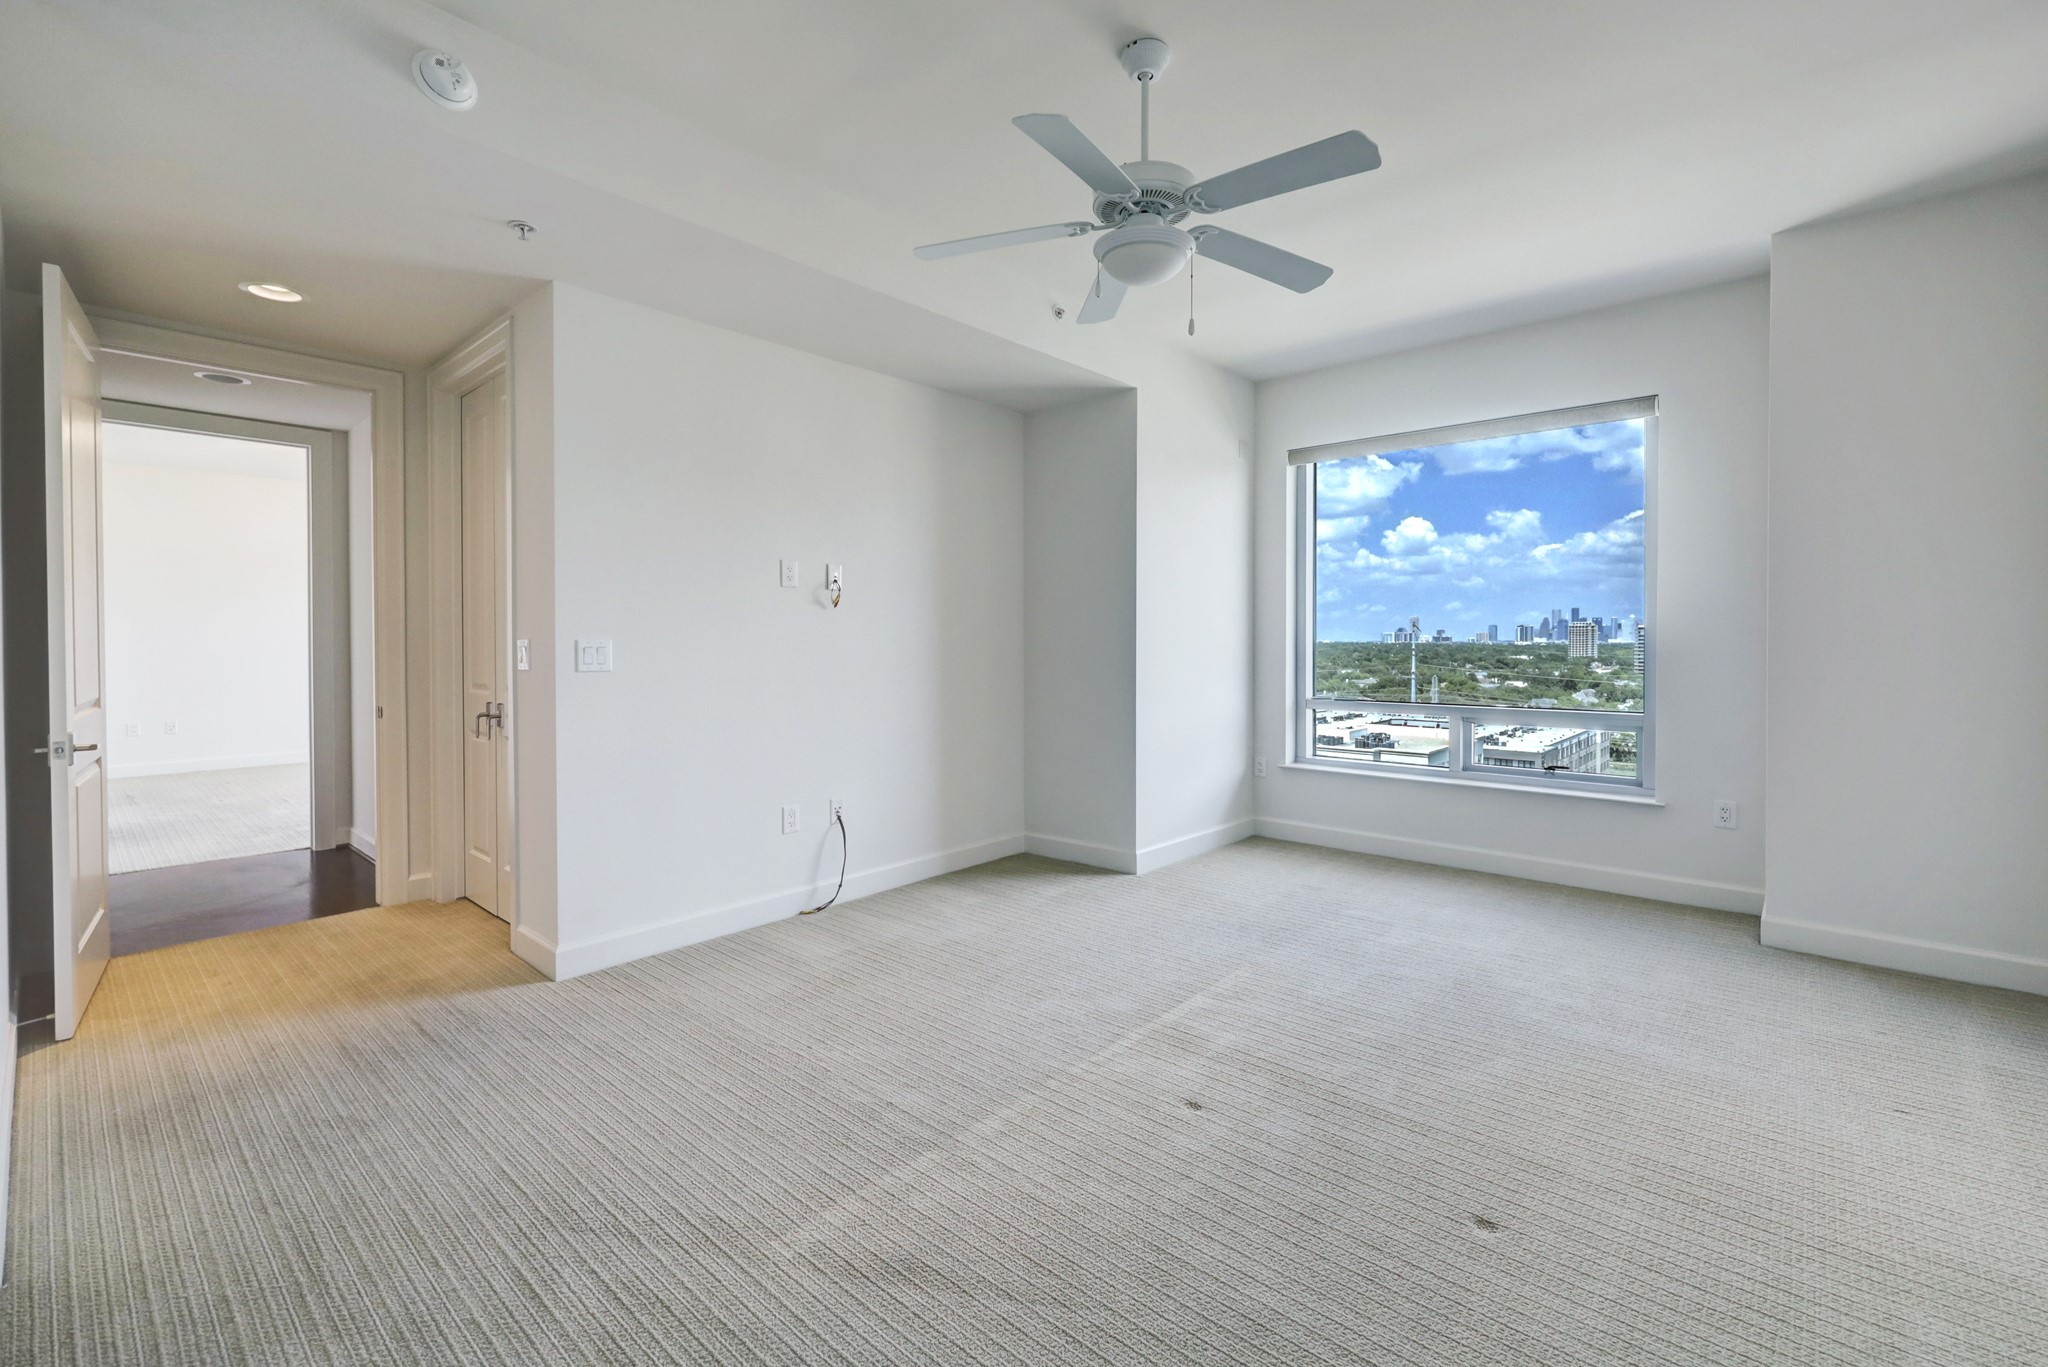 The spacious 21 x 19 Primary bedroom has a window that picture frames downtown Houston! Imagine that view from your bed as you go to sleep or wake up in the morning.